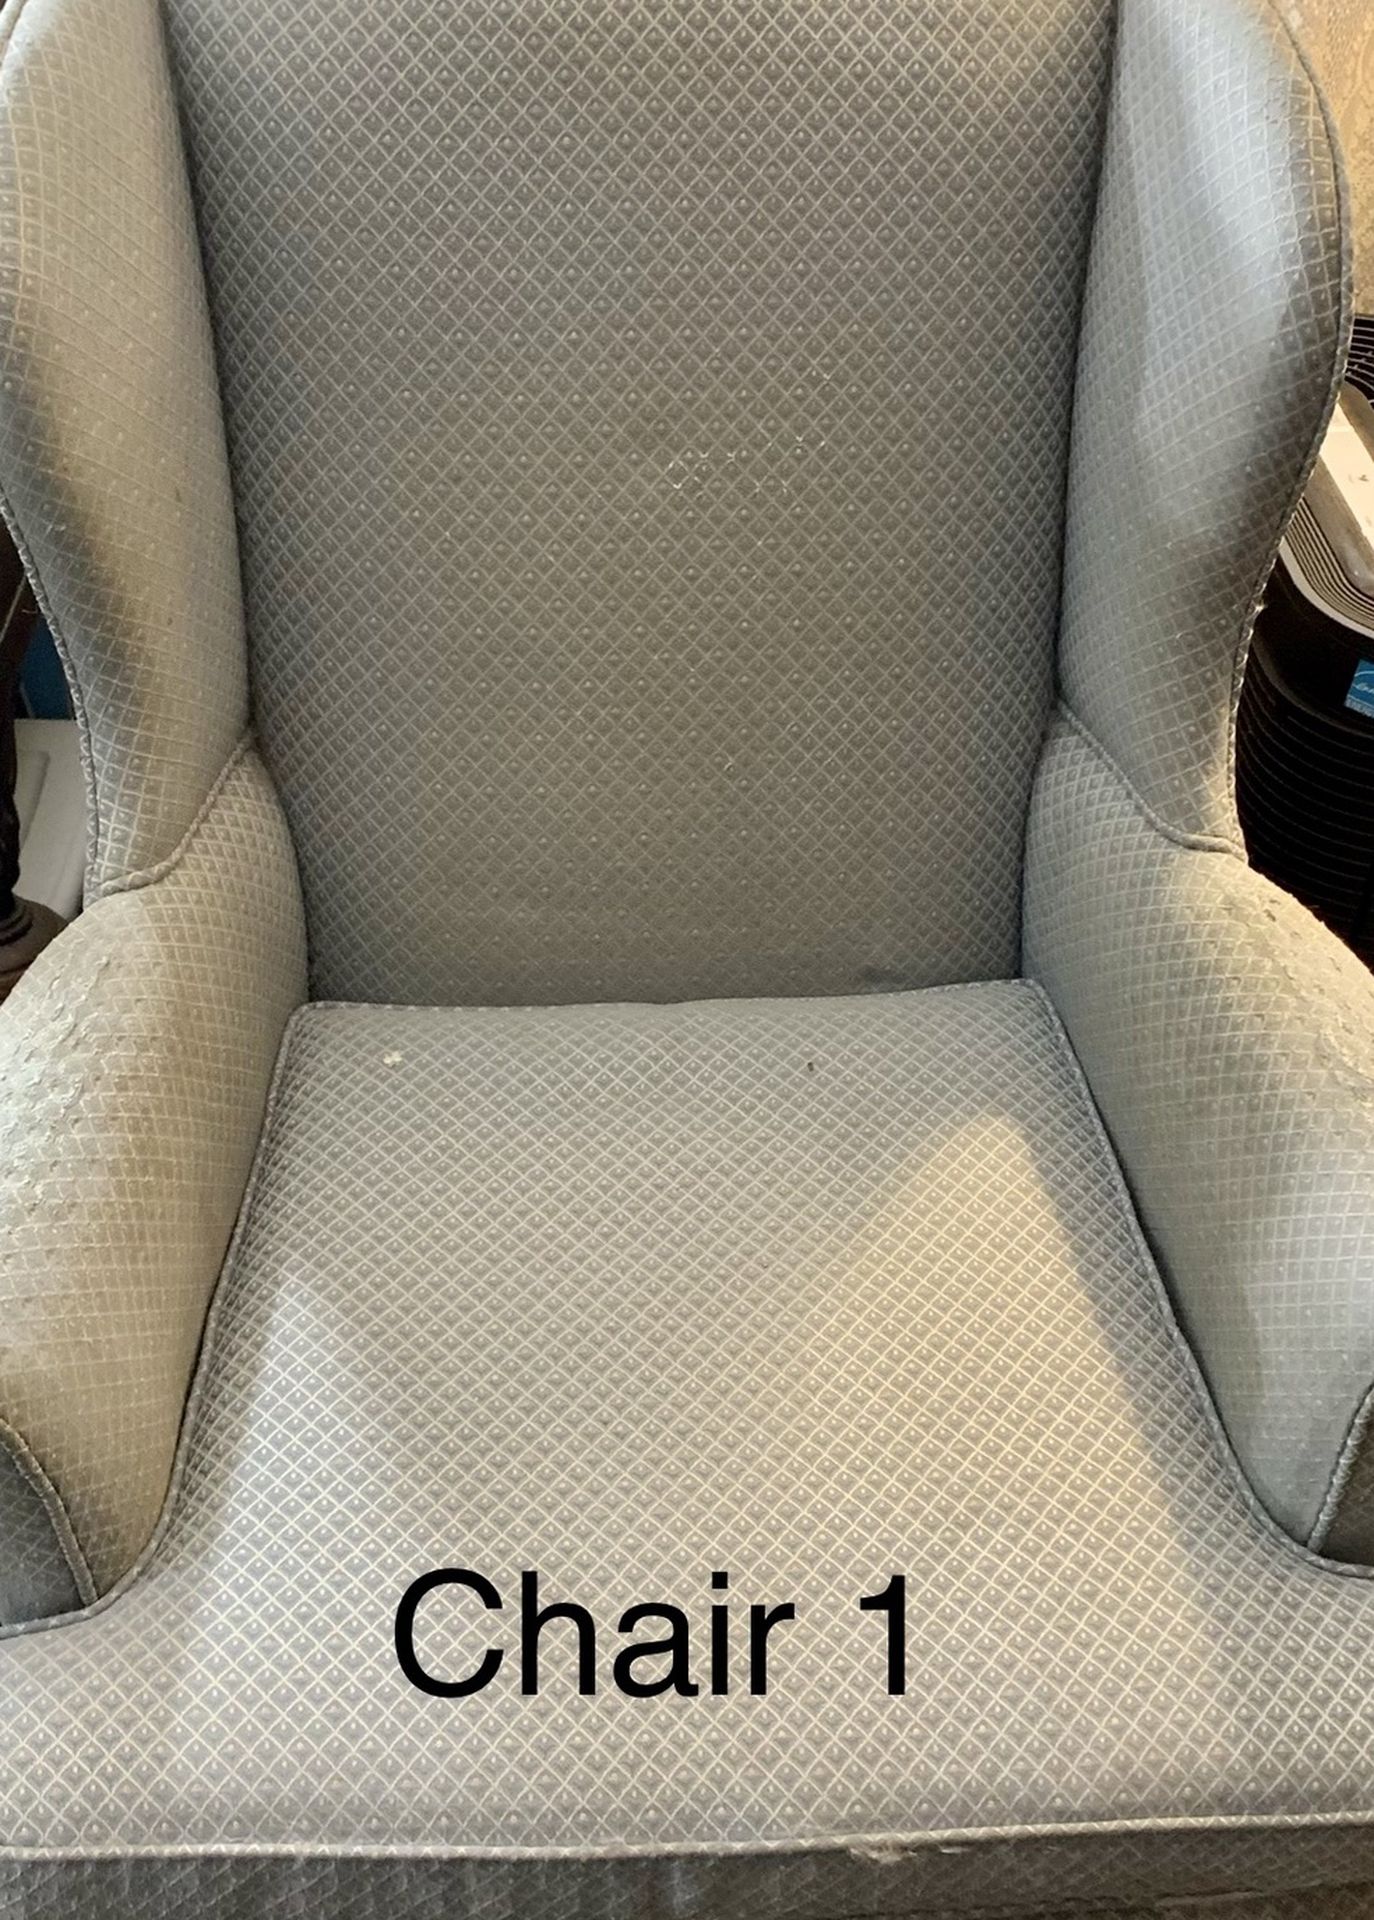 Two Chairs for FREE!